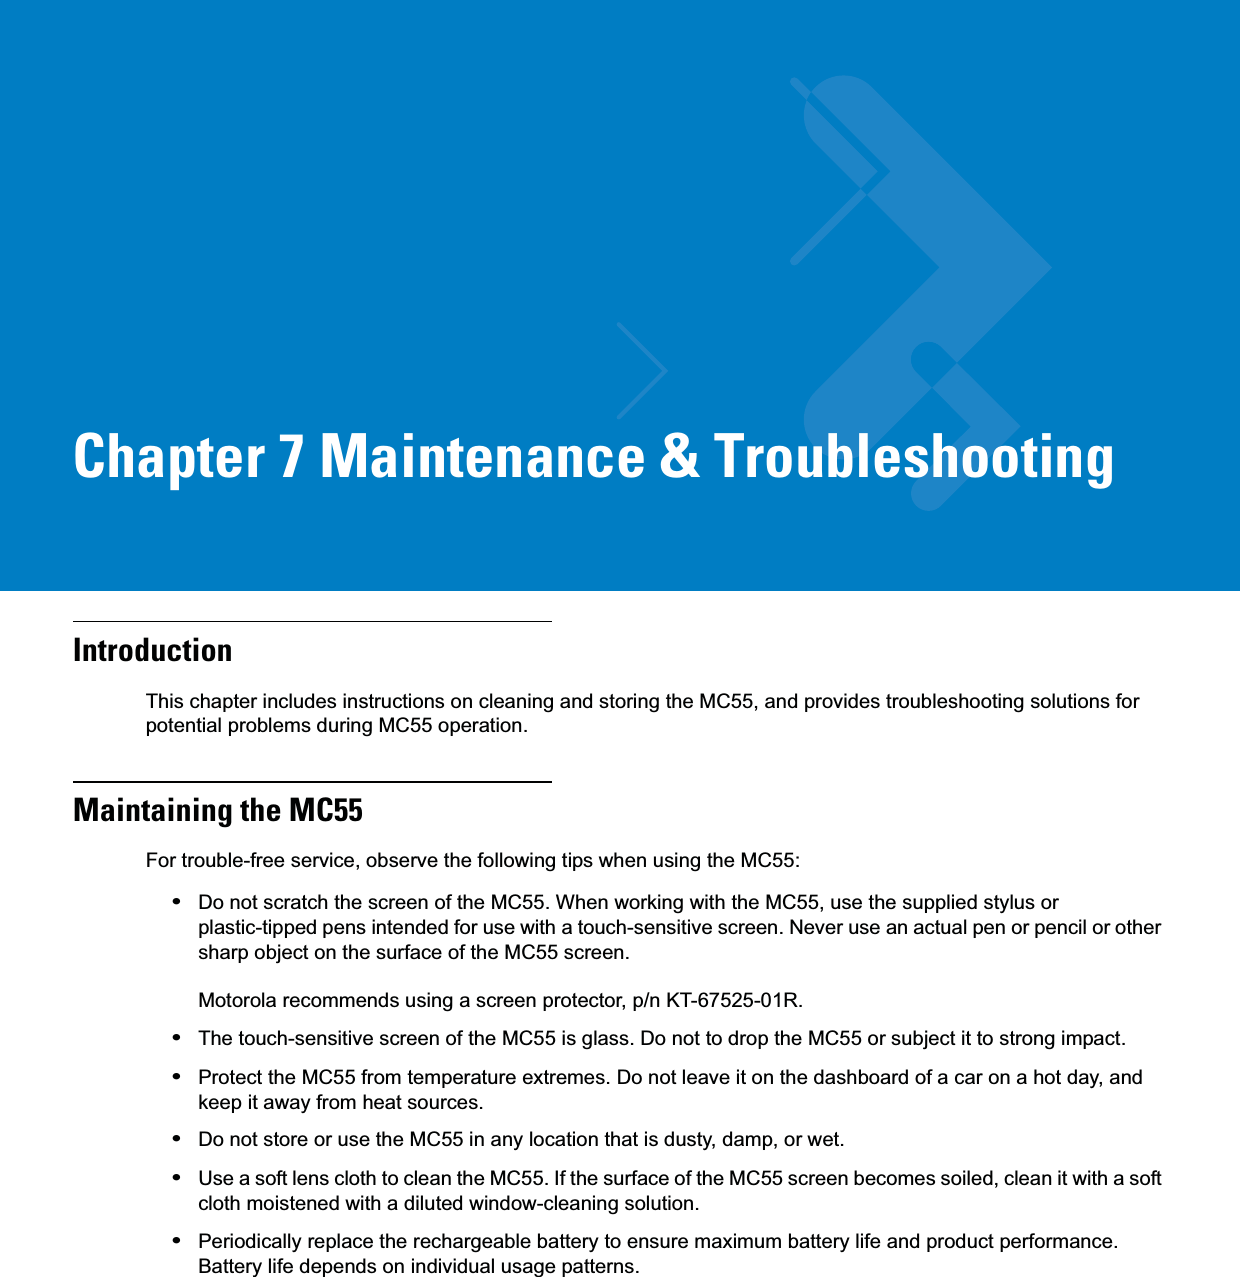 Chapter 7 Maintenance &amp; TroubleshootingIntroductionThis chapter includes instructions on cleaning and storing the MC55, and provides troubleshooting solutions for potential problems during MC55 operation.Maintaining the MC55For trouble-free service, observe the following tips when using the MC55:•Do not scratch the screen of the MC55. When working with the MC55, use the supplied stylus or plastic-tipped pens intended for use with a touch-sensitive screen. Never use an actual pen or pencil or other sharp object on the surface of the MC55 screen. Motorola recommends using a screen protector, p/n KT-67525-01R.•The touch-sensitive screen of the MC55 is glass. Do not to drop the MC55 or subject it to strong impact.•Protect the MC55 from temperature extremes. Do not leave it on the dashboard of a car on a hot day, and keep it away from heat sources.•Do not store or use the MC55 in any location that is dusty, damp, or wet.•Use a soft lens cloth to clean the MC55. If the surface of the MC55 screen becomes soiled, clean it with a soft cloth moistened with a diluted window-cleaning solution.•Periodically replace the rechargeable battery to ensure maximum battery life and product performance. Battery life depends on individual usage patterns.